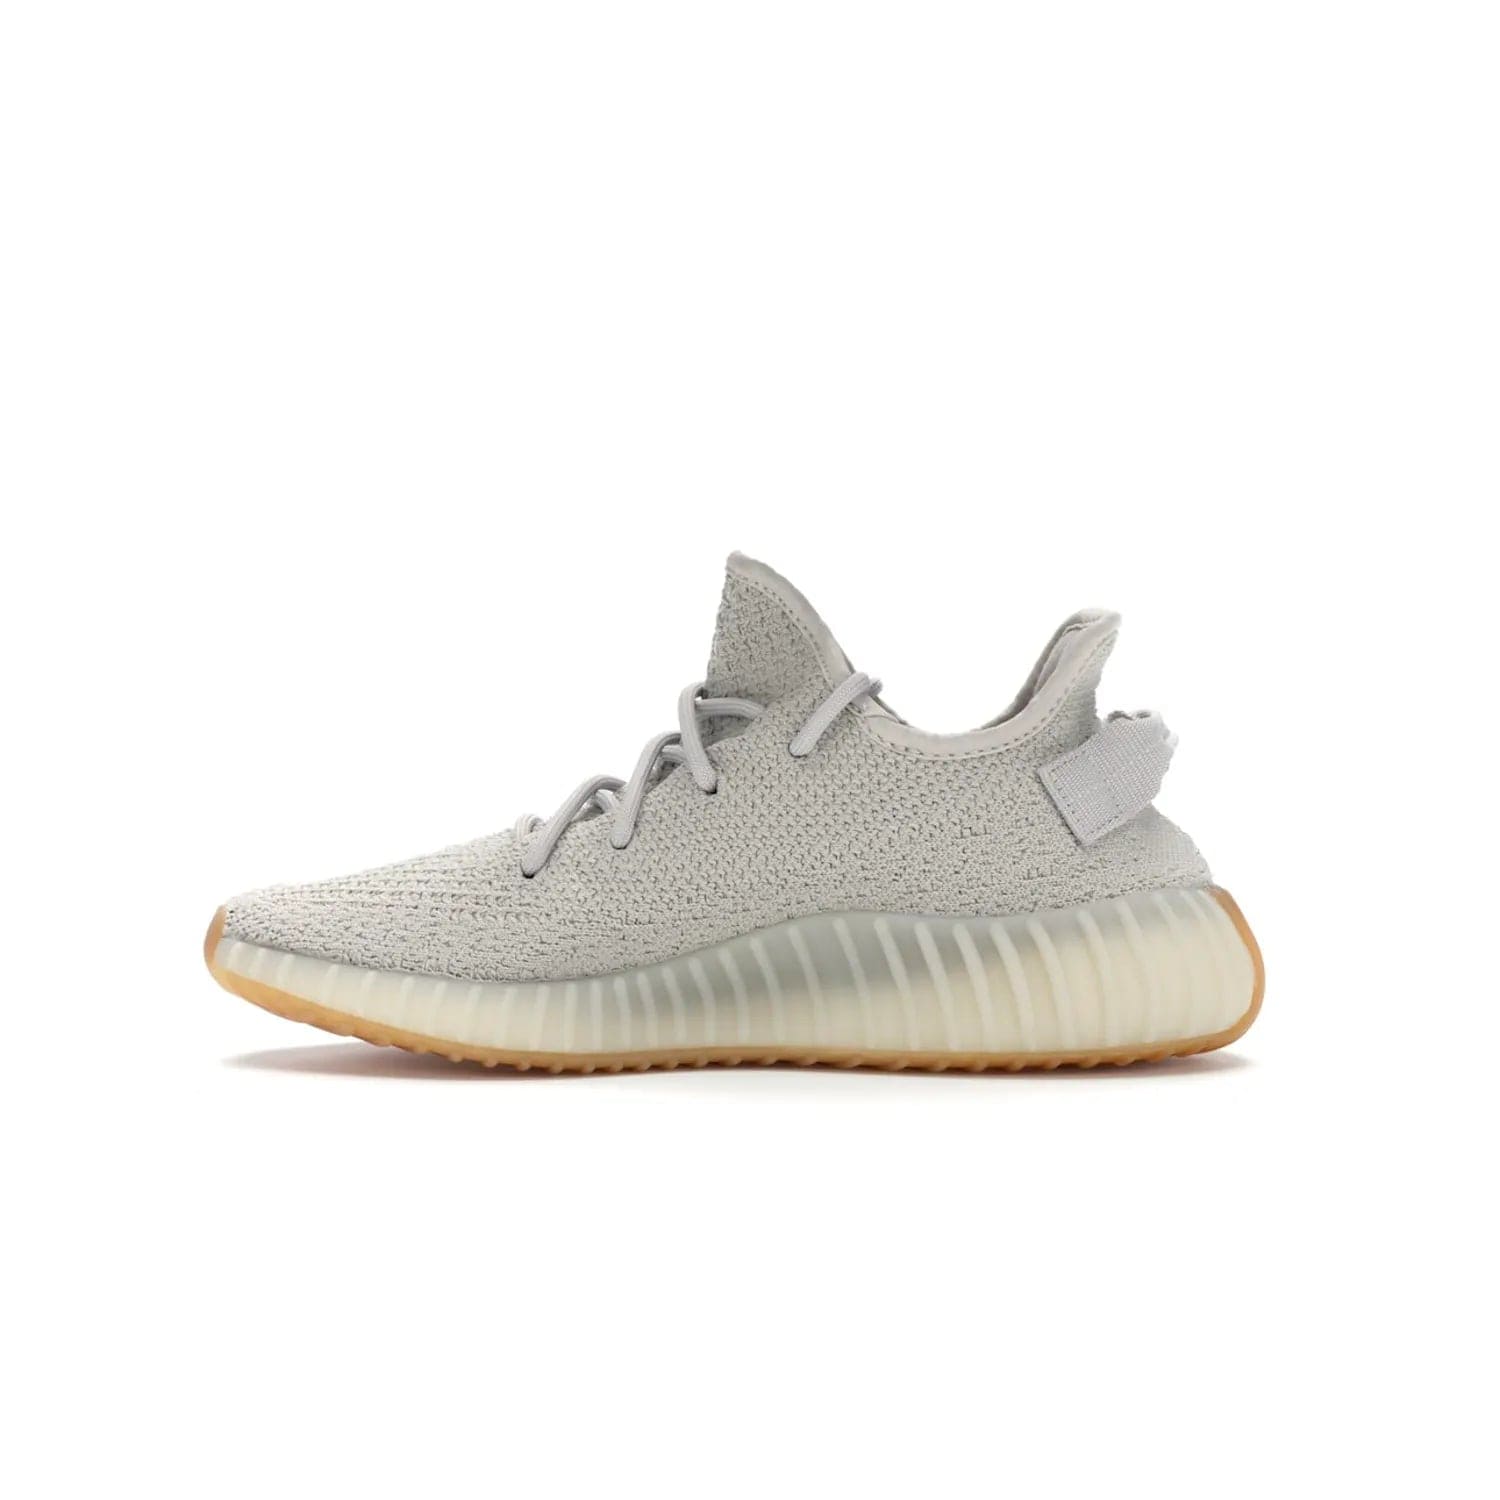 adidas Yeezy Boost 350 V2 Sesame - Image 20 - Only at www.BallersClubKickz.com - Introducing the adidas Yeezy Boost 350 V2 Sesame. Featuring a sesame upper, midsole and gum sole for a sleek silhouette. Cop the stylish sneaker released in November 2018.